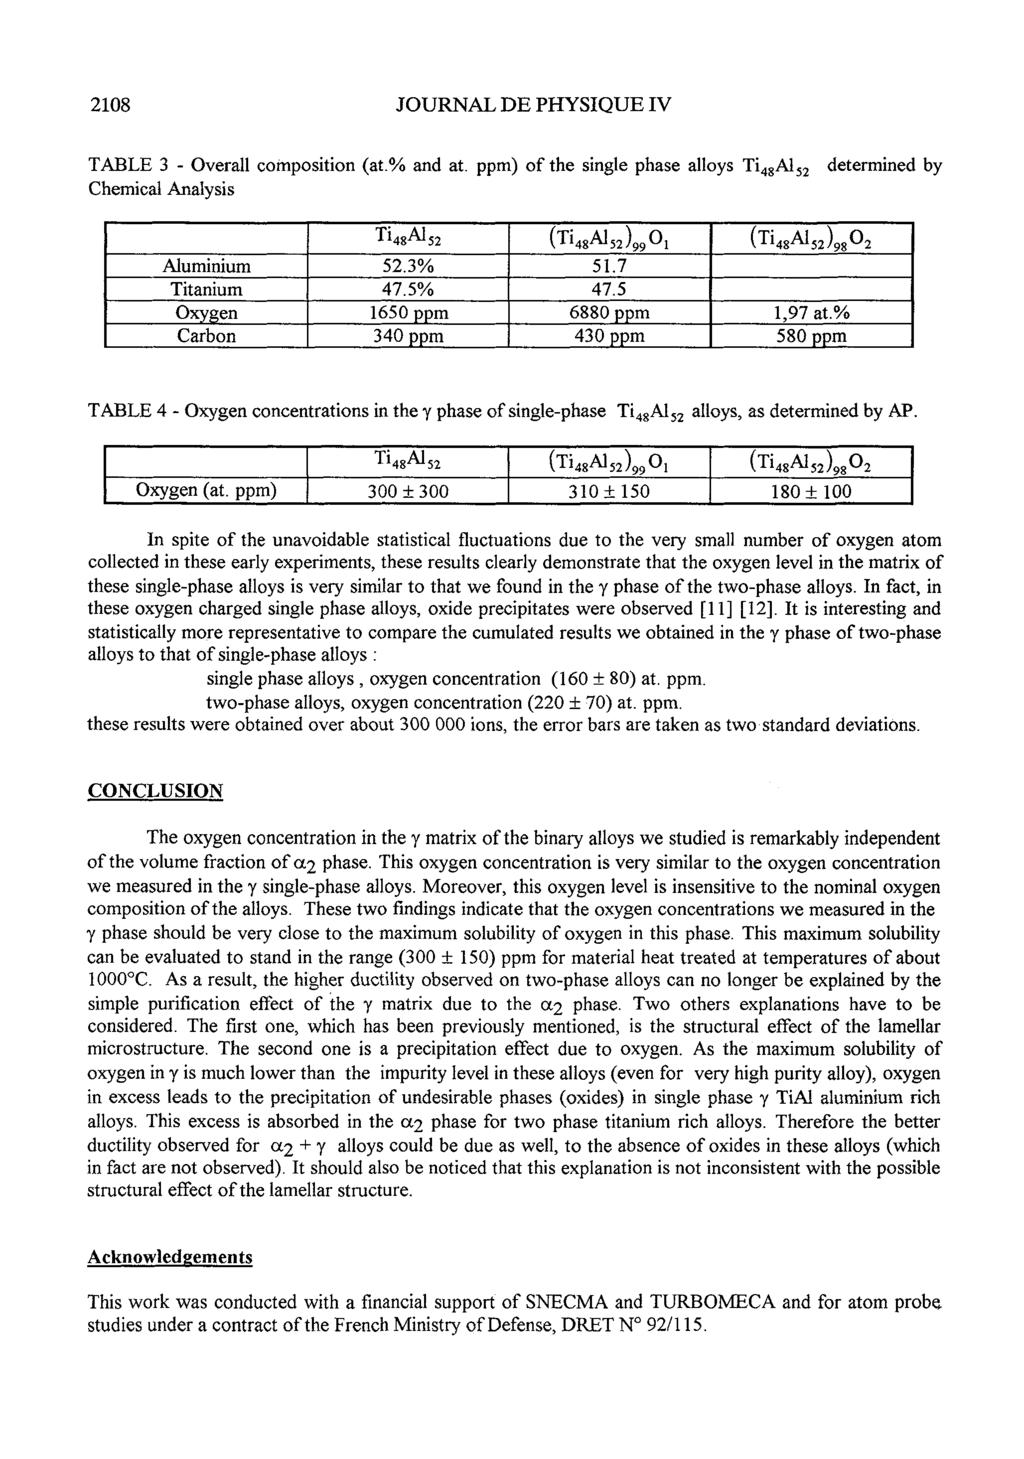 2108 JOURNAL DE PHYSIQUE IV TABLE 3 - Overall composition (at.% and at. ppm) of the single phase alloys Ti4,A15, determined by Chemical Analysis Aluminium Titanium Oxygen Carbon Ti48A152 52.3% 47.